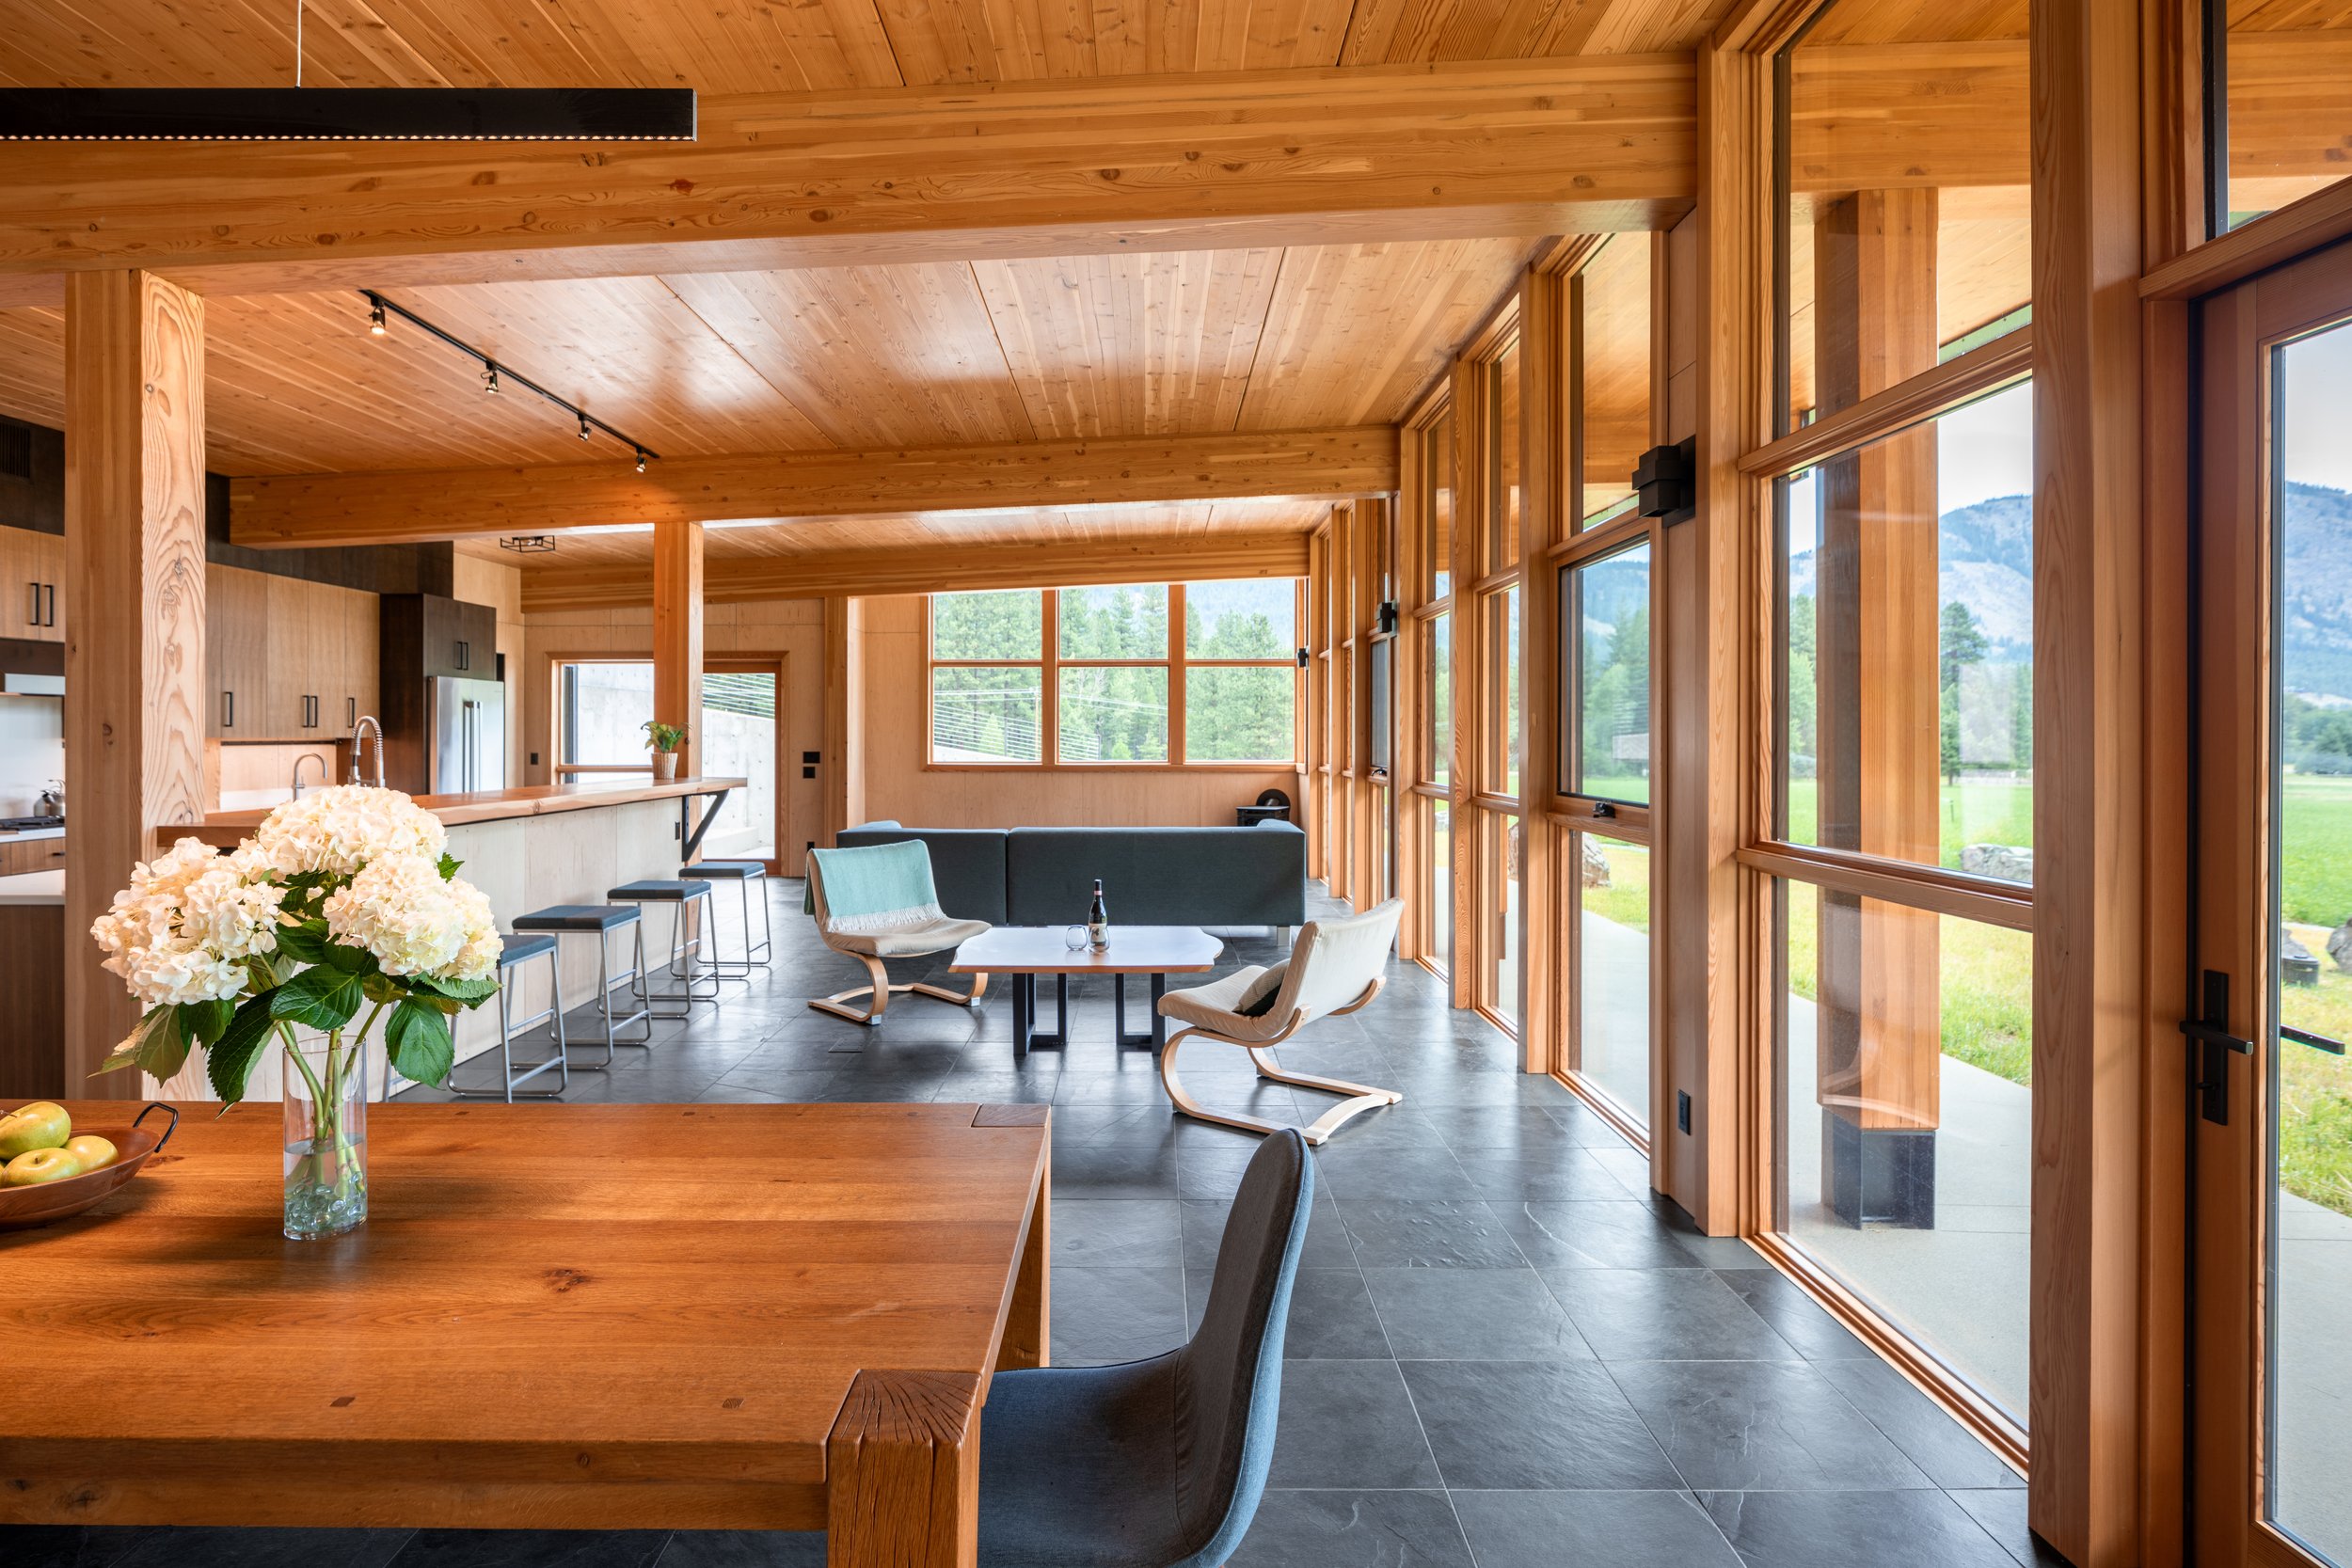  The Berm House is designed with Passive House principles, using superinsulation, advanced air sealing, cross-laminated timber panels, and a live roof. And, it serves as a common house for its co-housing neighborhood, reflecting a vision of community